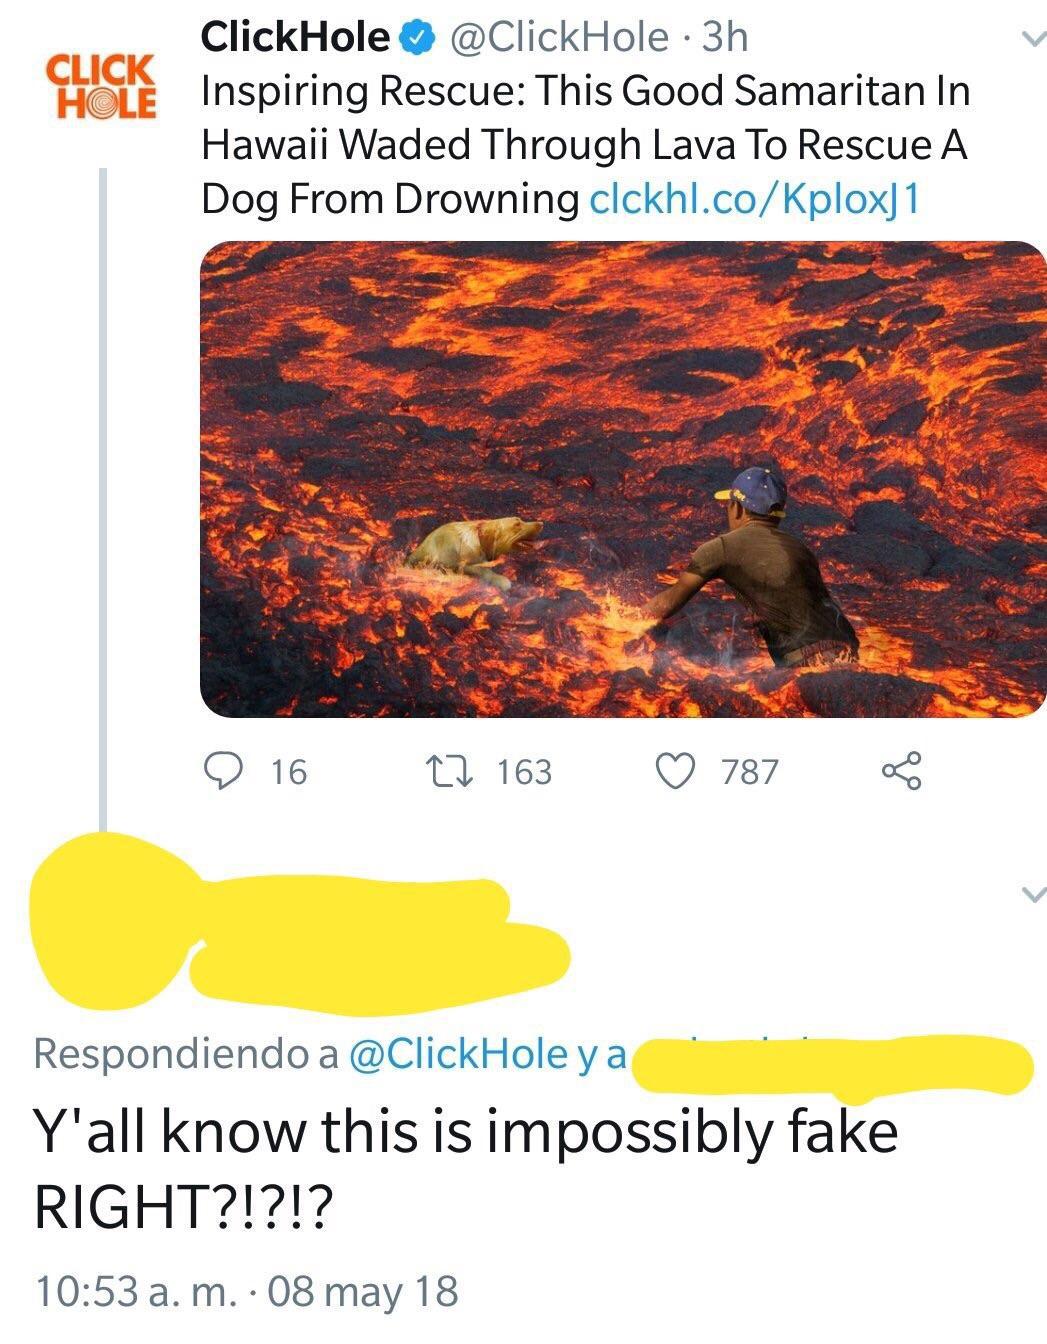 missed - heat - Chicken ClickHole 3h Inspiring Rescue This Good Samaritan In Hawaii Waded Through Lava To Rescue A Dog From Drowning clckhl.coKplox 1 9 16 22 163 787 56 Respondiendo a ya Y'all know this is impossibly fake Right?!?!? a. m. 08 may 18